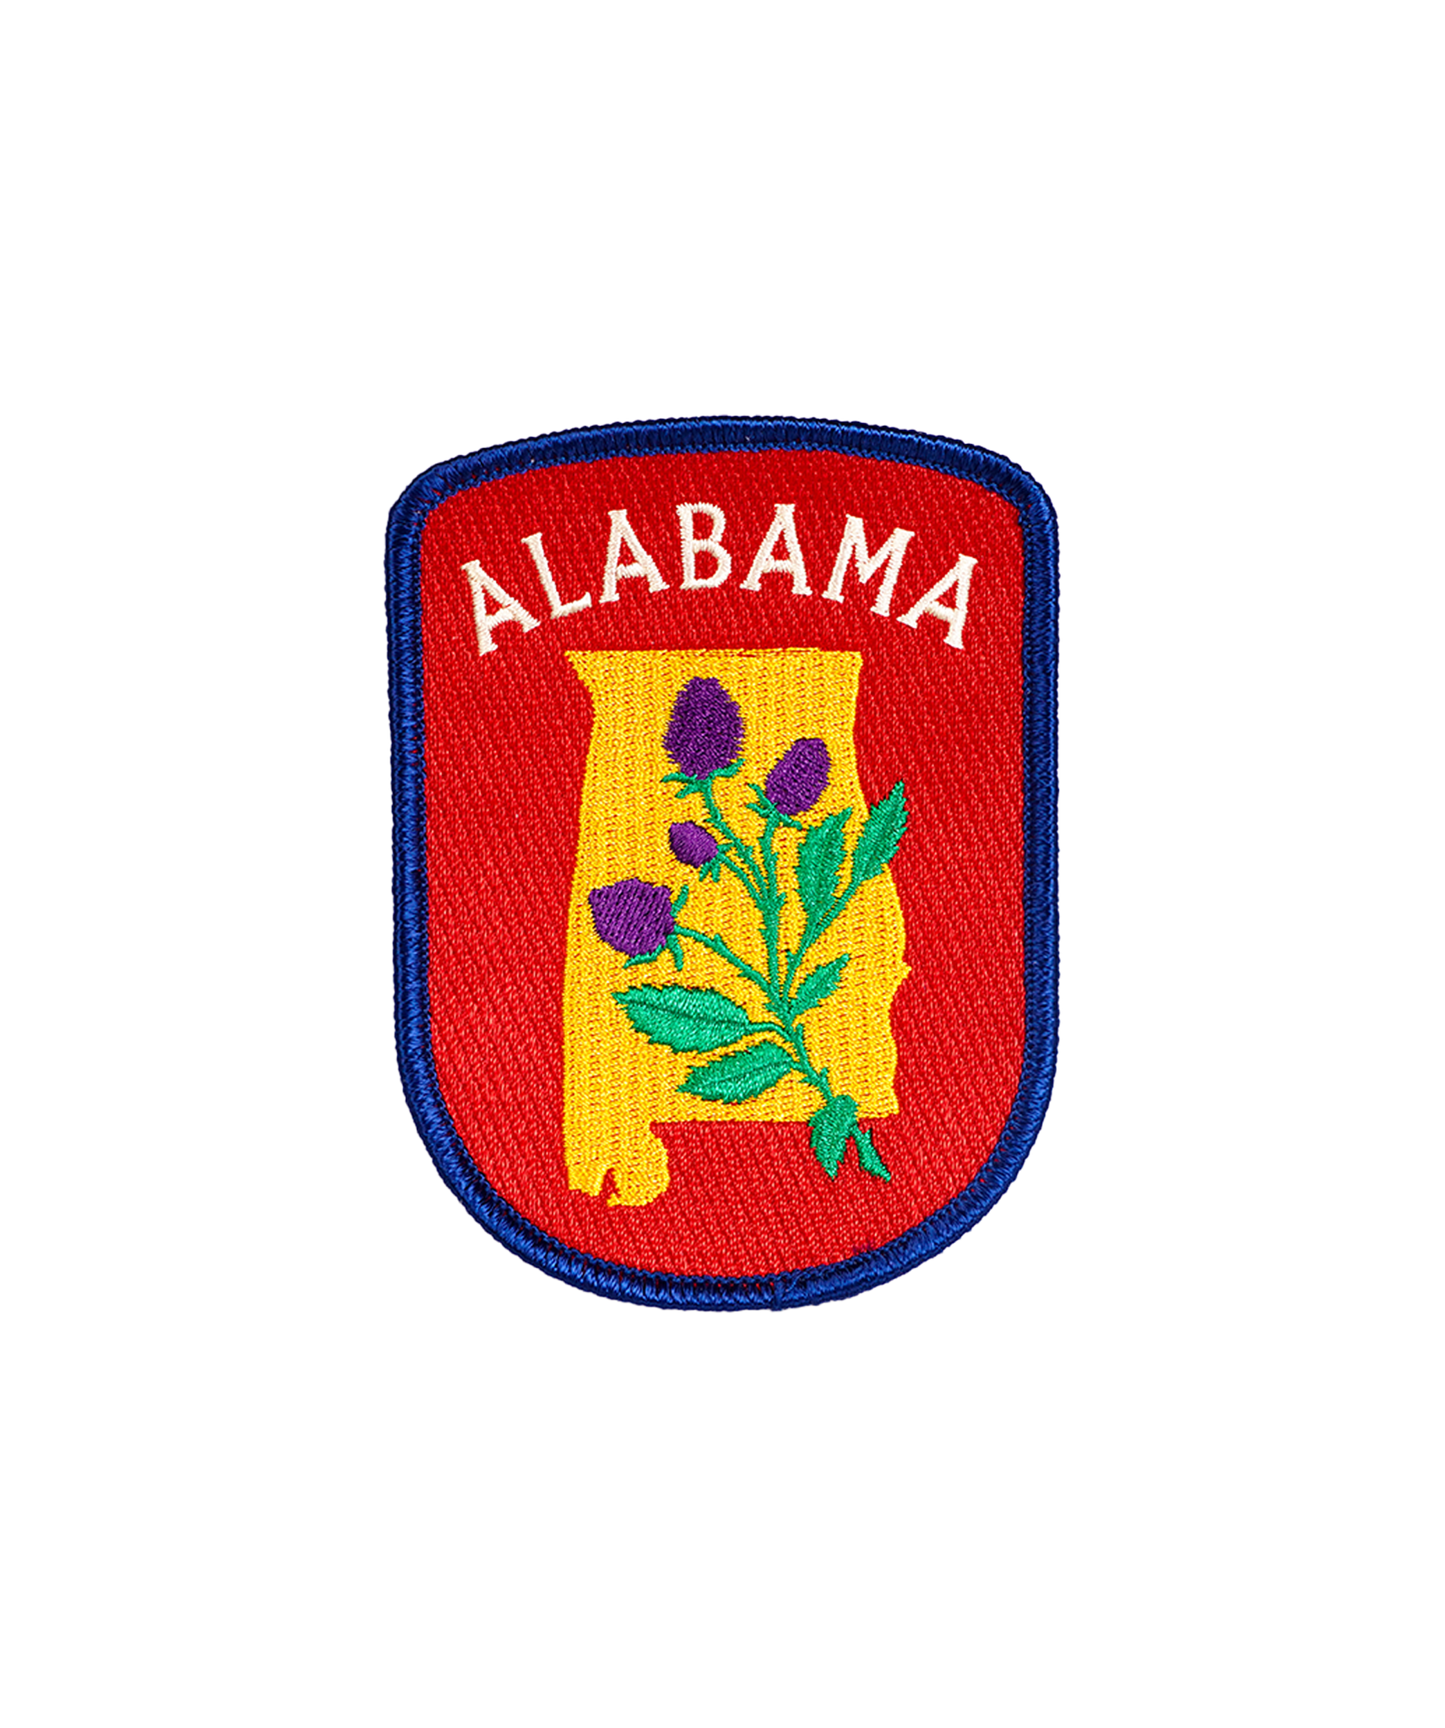 Alabama Embroidered Patch